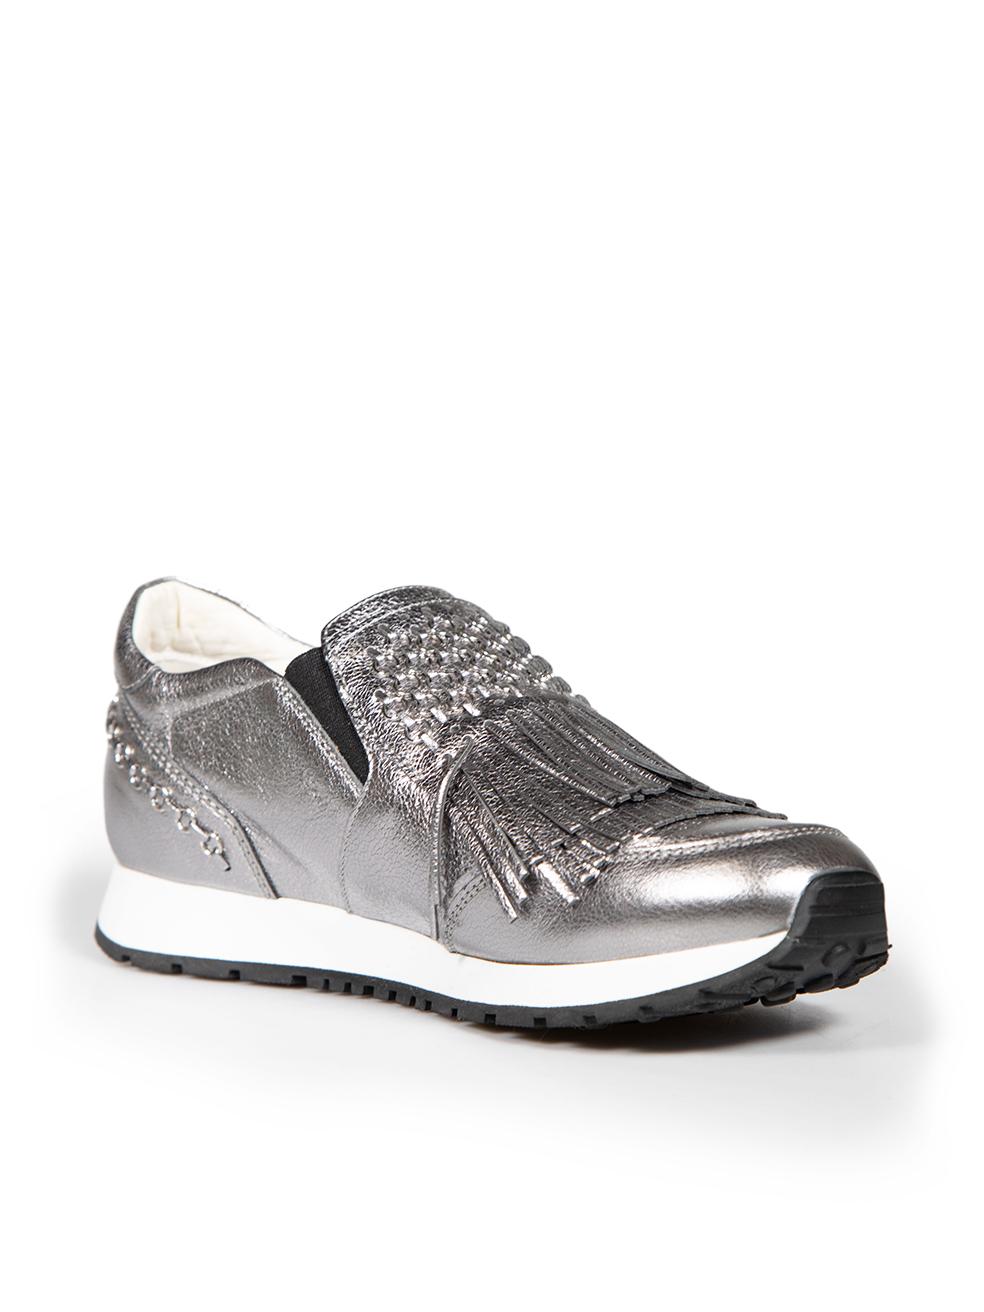 CONDITION is Very good. Minimal wear to trainers is evident. Minimal wear to inside heel, where there is discolouration to the leather on this used Tod's designer resale item.
 
 
 
 Details
 
 
 Silver
 
 Leather
 
 Trainers
 
 Slip on
 
 Round